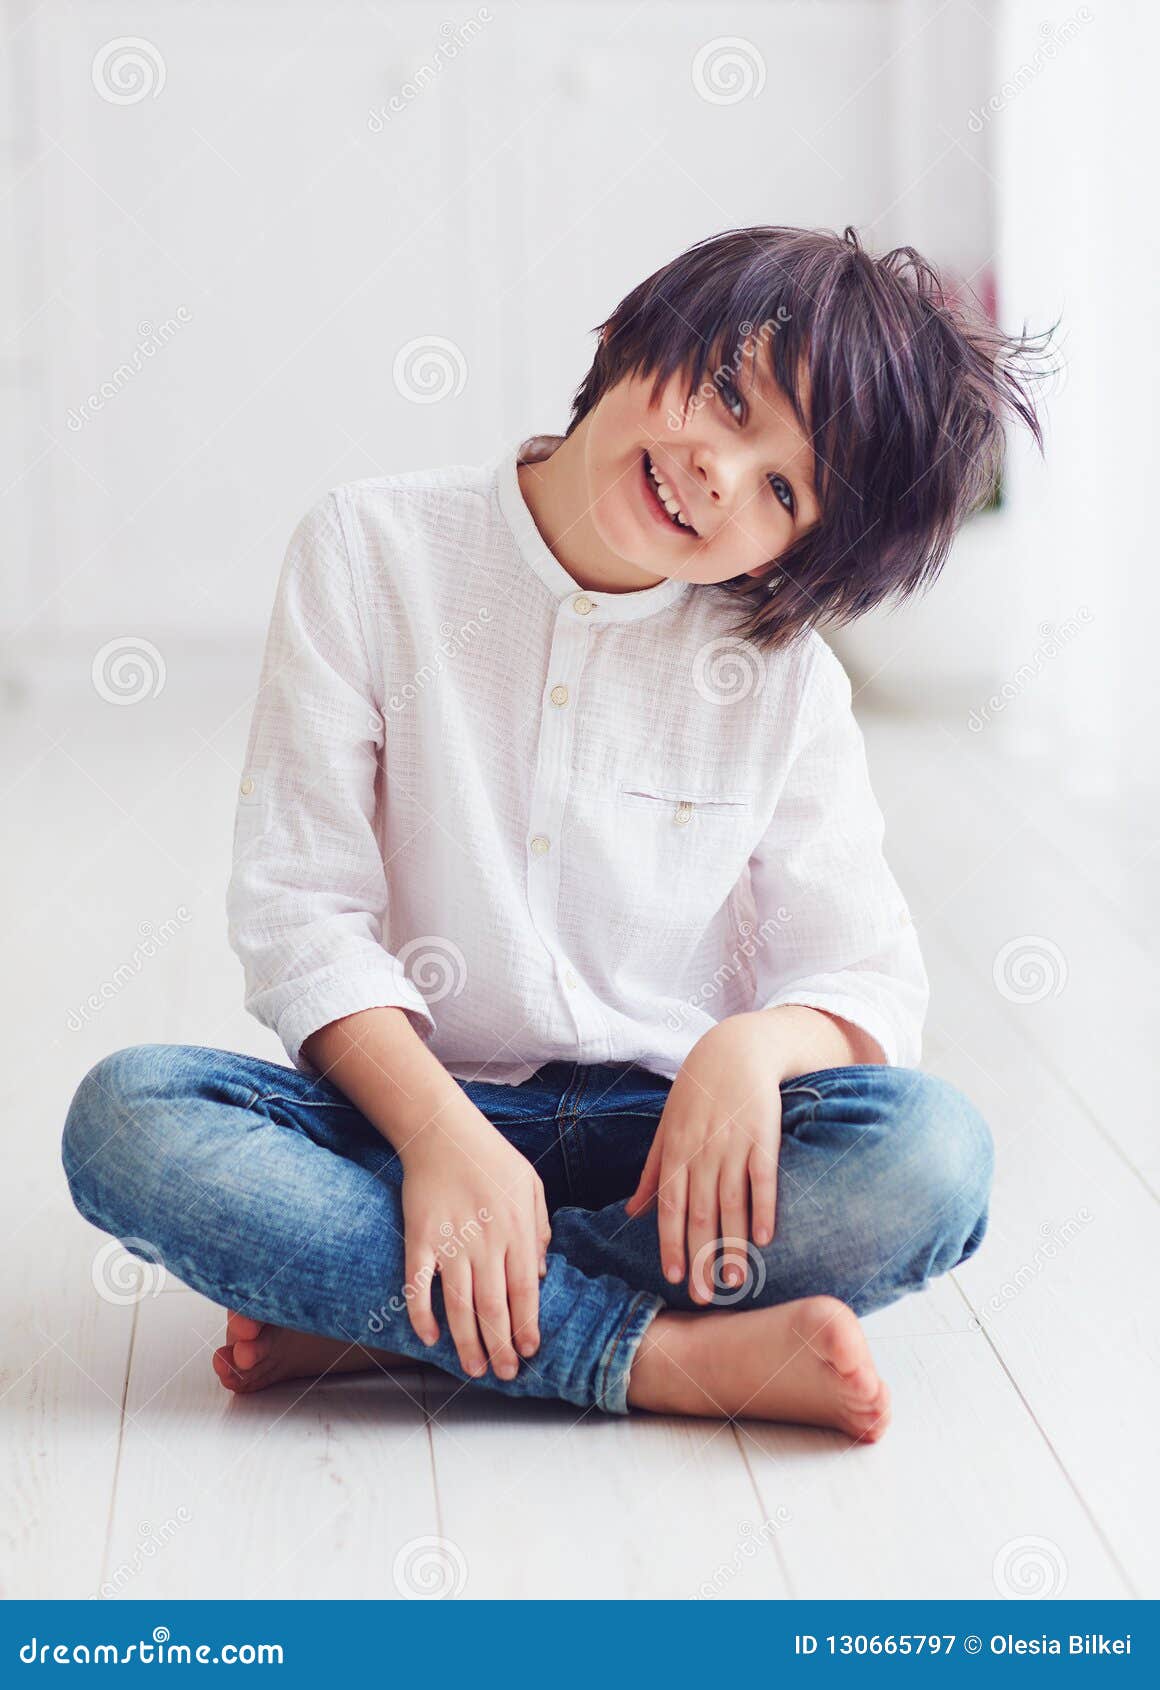 Smiling Anime Manga Young Boy Character Posing Barefoot in Bright Room  Stock Image - Image of model, cute: 130665797